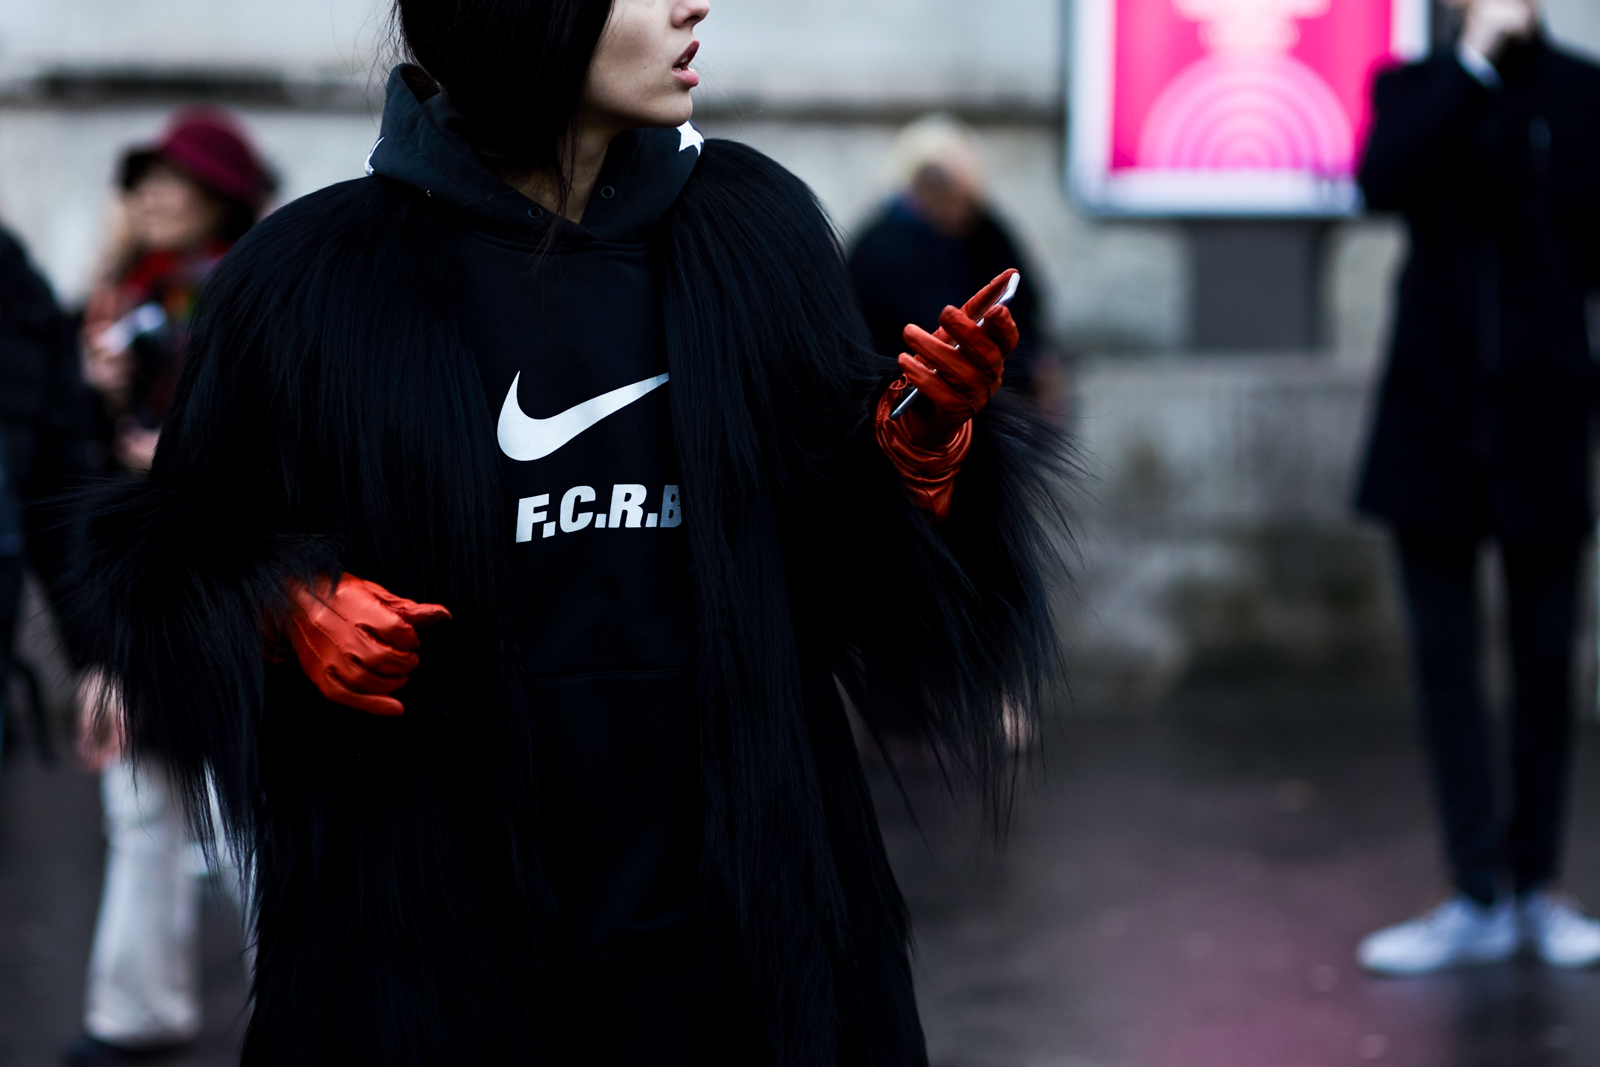 Street Style Gilda Ambrosio wearing a Nike hoodie, black fur coat and red leather gloves at the Rochas Fall/Winter 2016-2017 fashion show in Paris, France